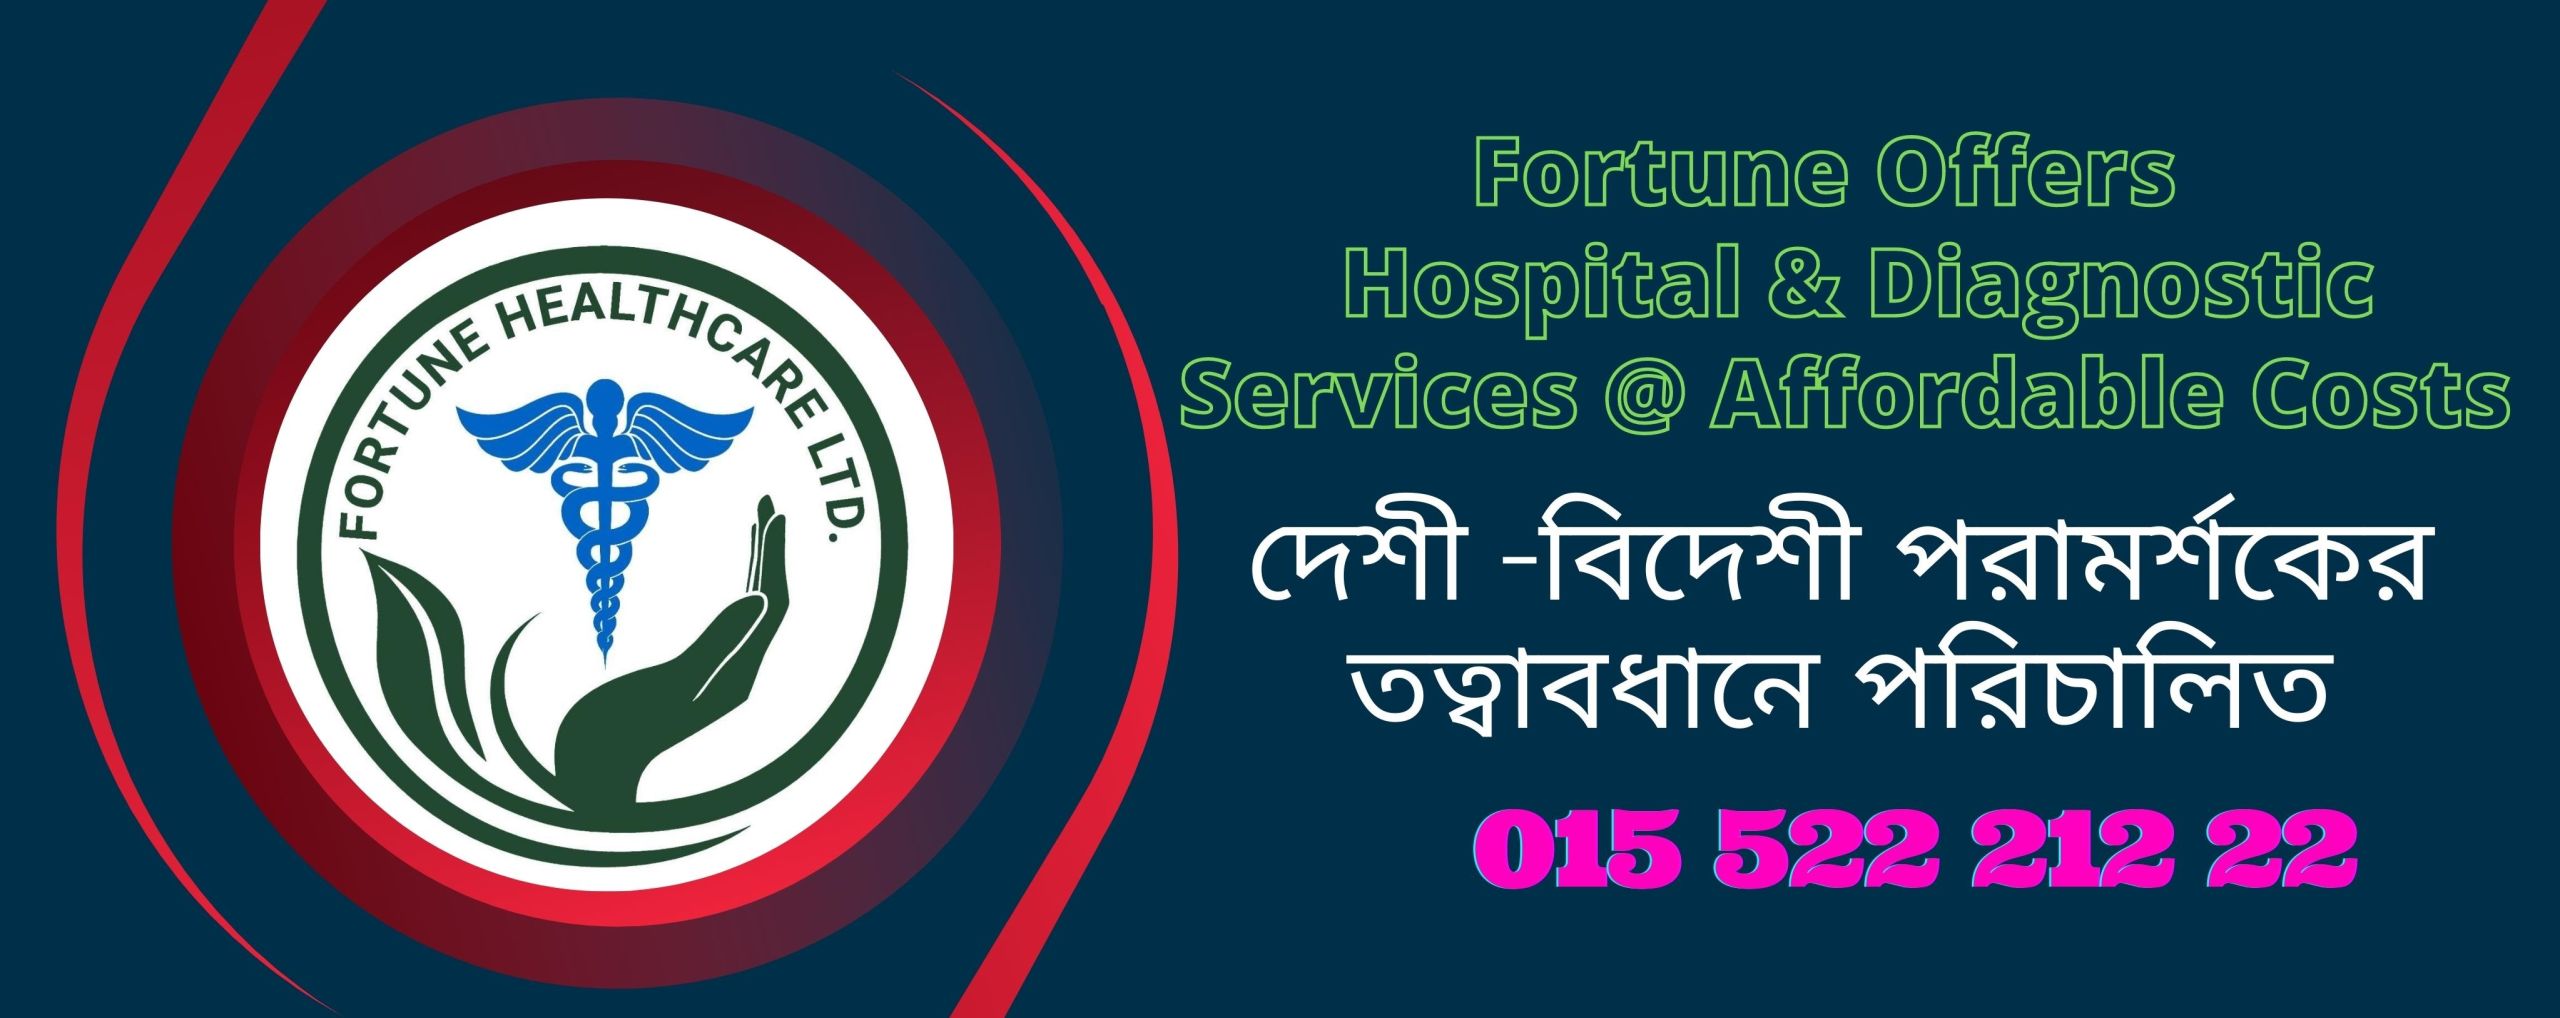 Services of Fortune Healthcare Ltd. Hospital